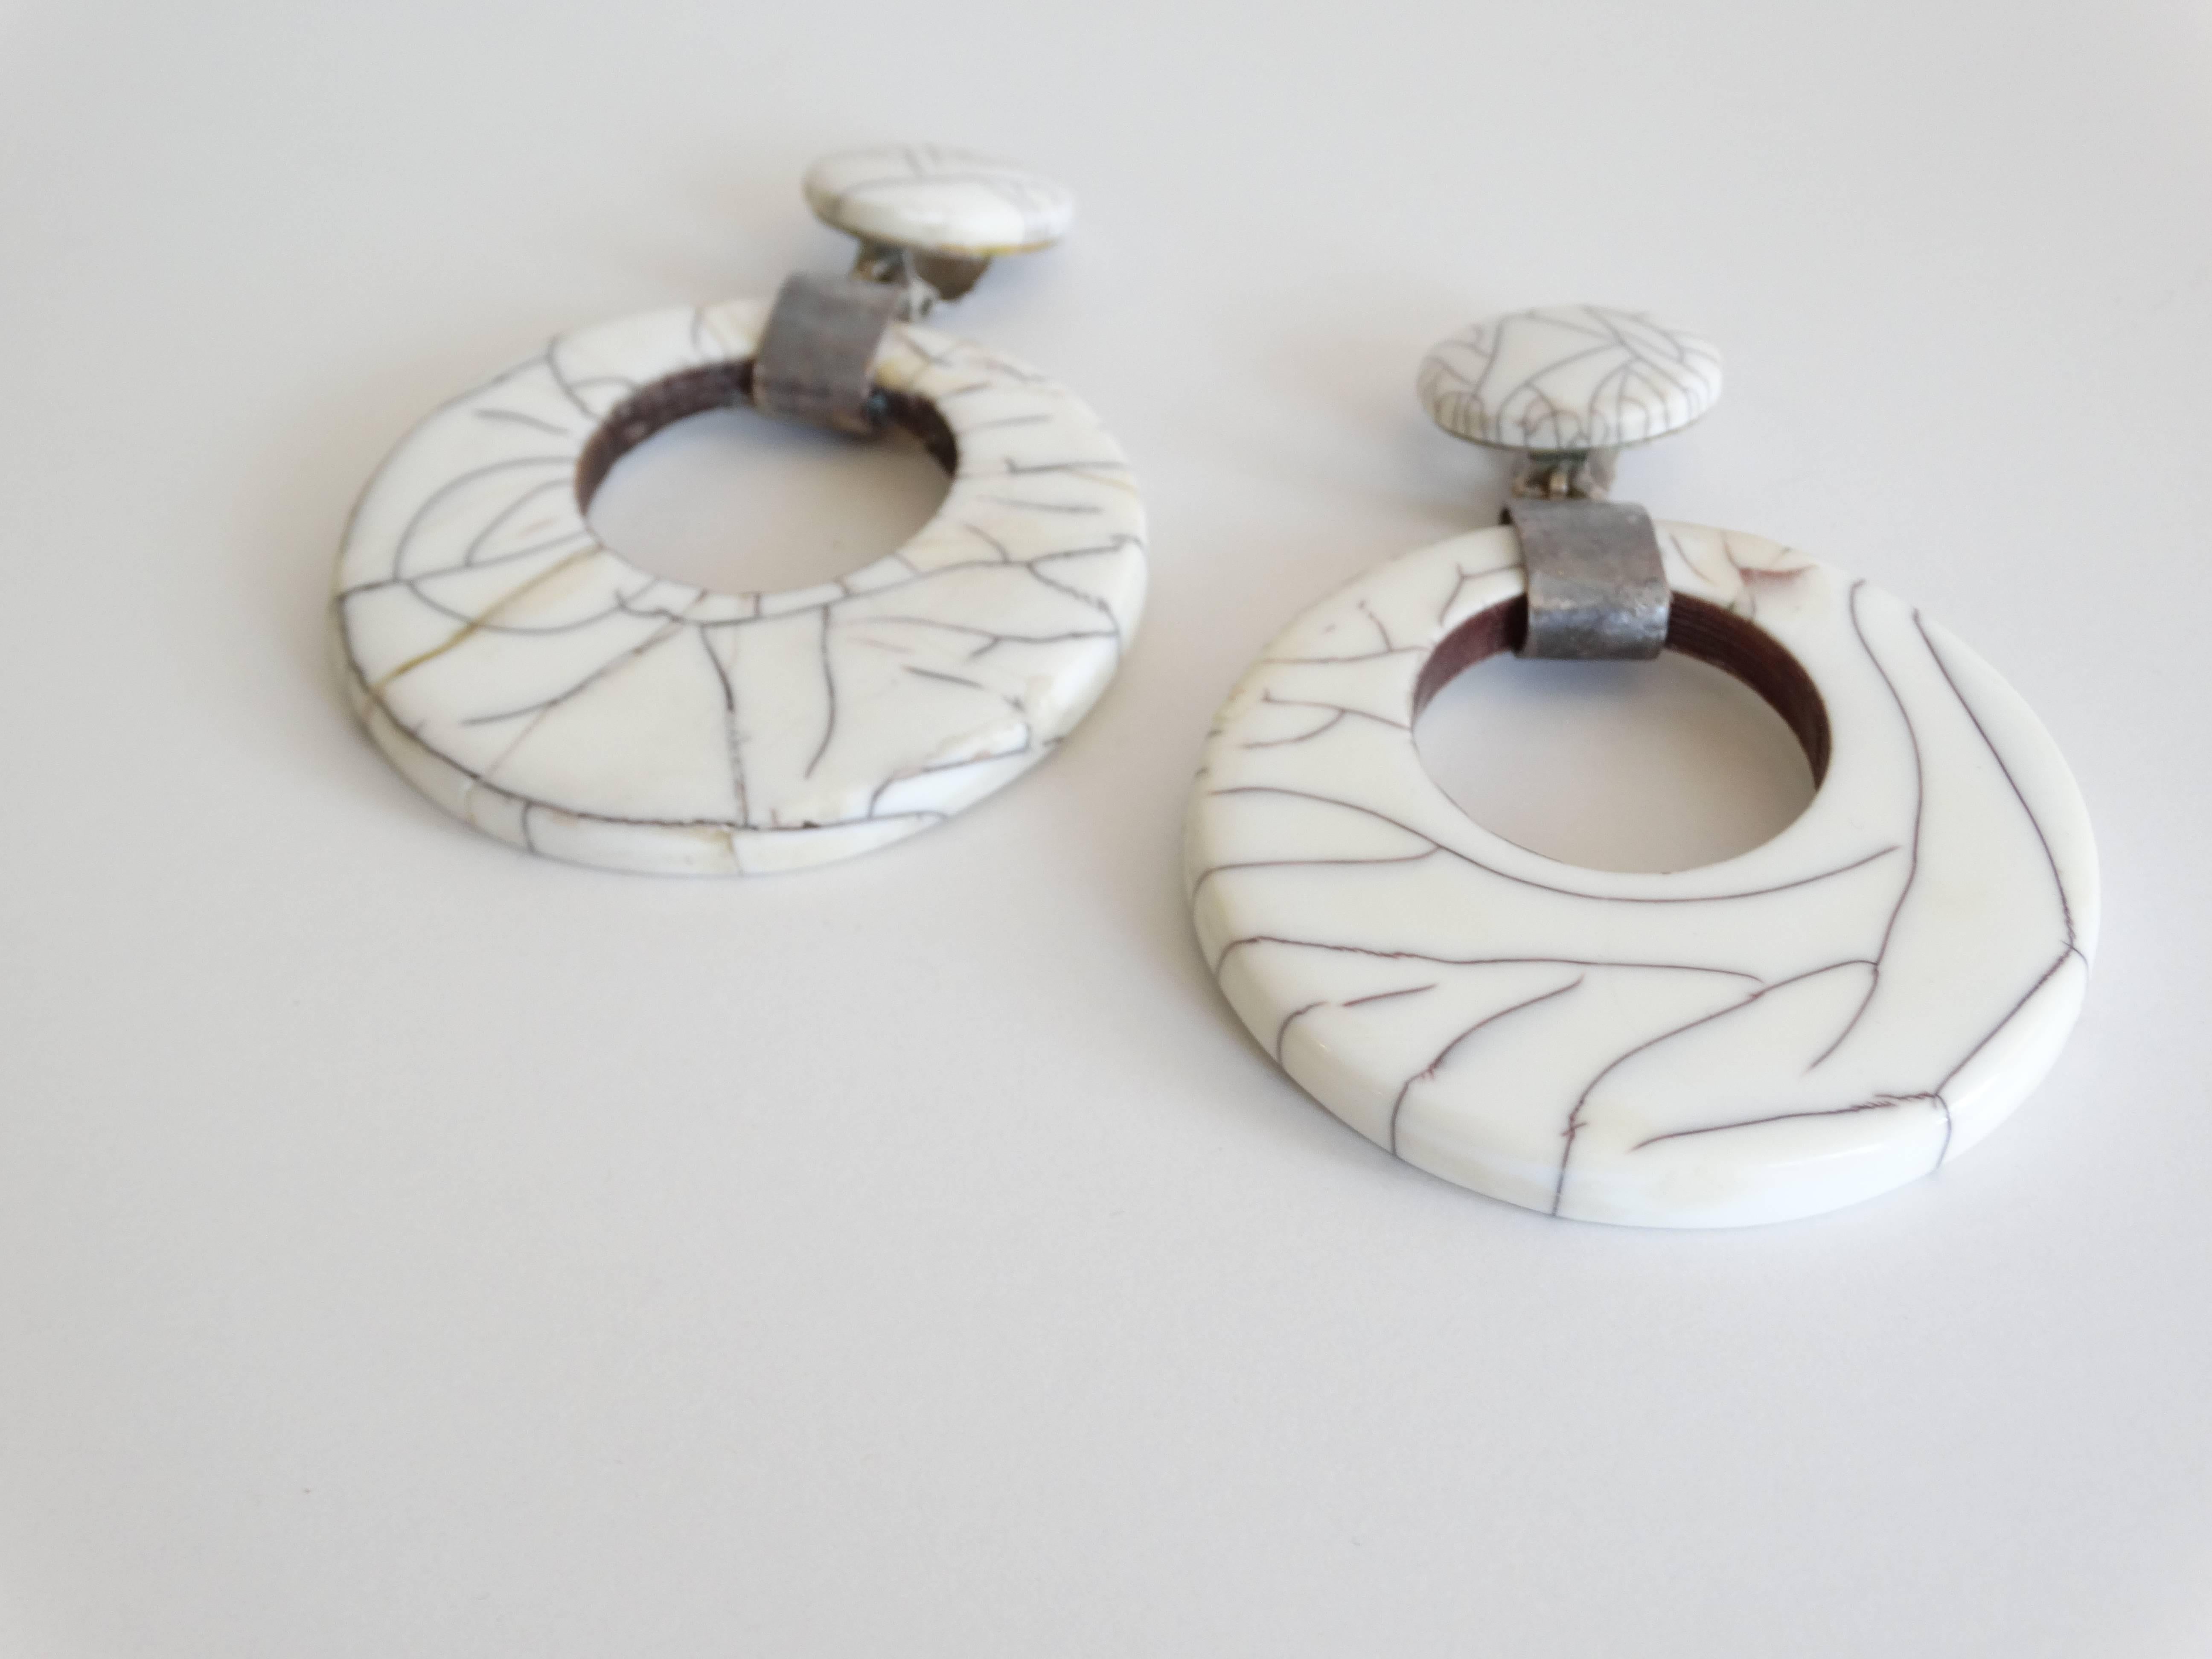 Fabulous Large Hoop Earrings designed by Premier Etage Paris in the mid-1980's. Made of a marbled white resin with silver hardware. Clip ons and light in weight. A great statement earring sure to turn heads. 

Measurements:
4